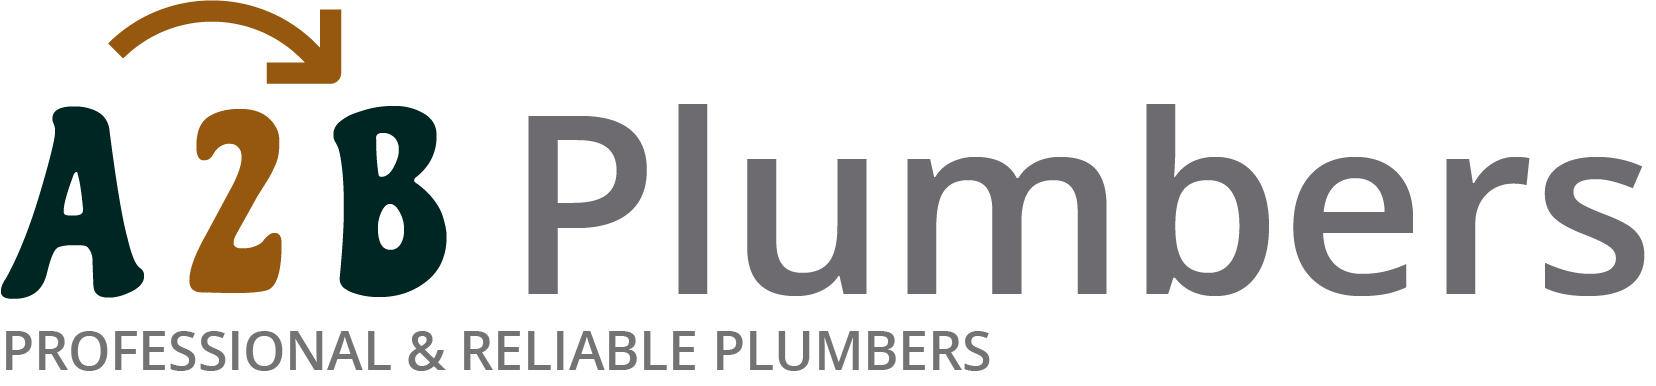 If you need a boiler installed, a radiator repaired or a leaking tap fixed, call us now - we provide services for properties in Wombourne and the local area.